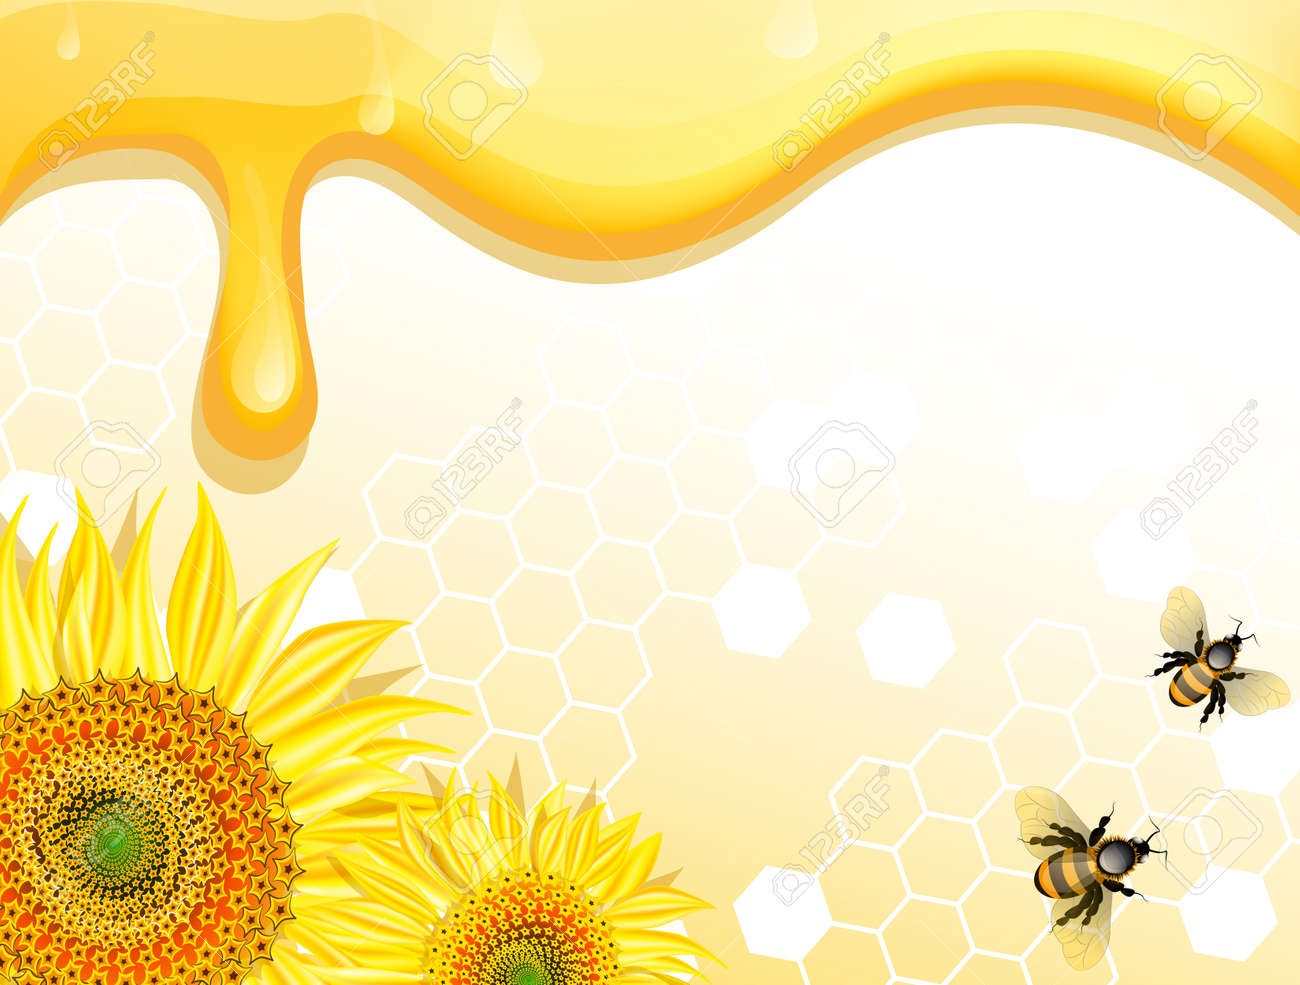 Sunflowers And Bees On Honey Background Royalty Svg Cliparts